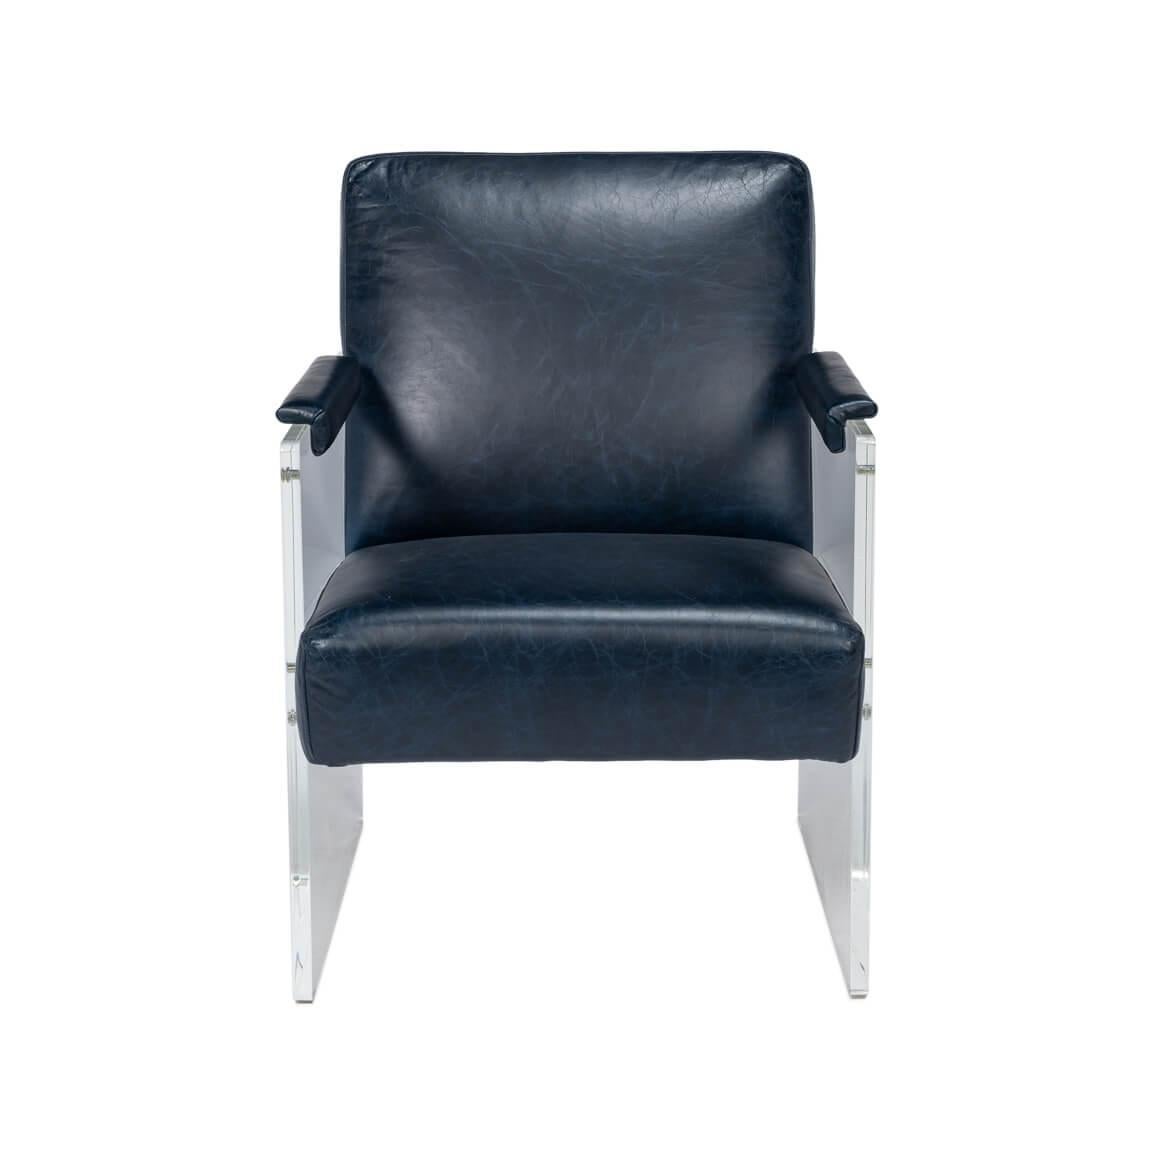 This chair features a bold fusion of avant-garde style and classic comfort. It showcases a sleek and updated Chateau Blue leather seat and backrest that provide a luxurious sitting experience, juxtaposed with clear acrylic side panels that create